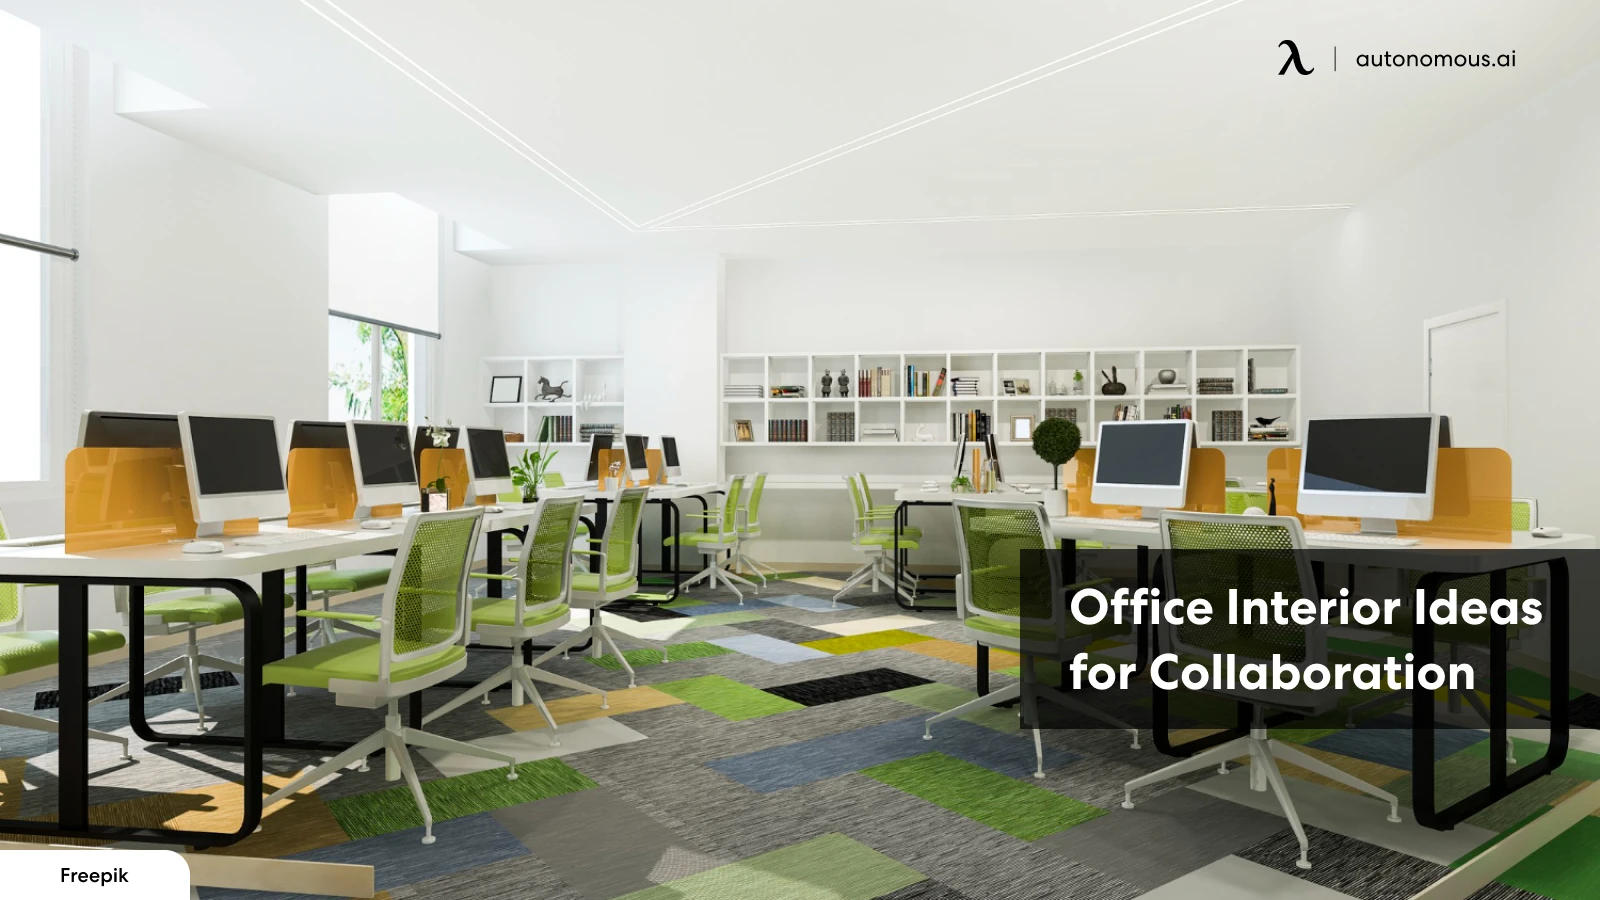 Office Interior Ideas for Promoting Teamwork and Collaboration